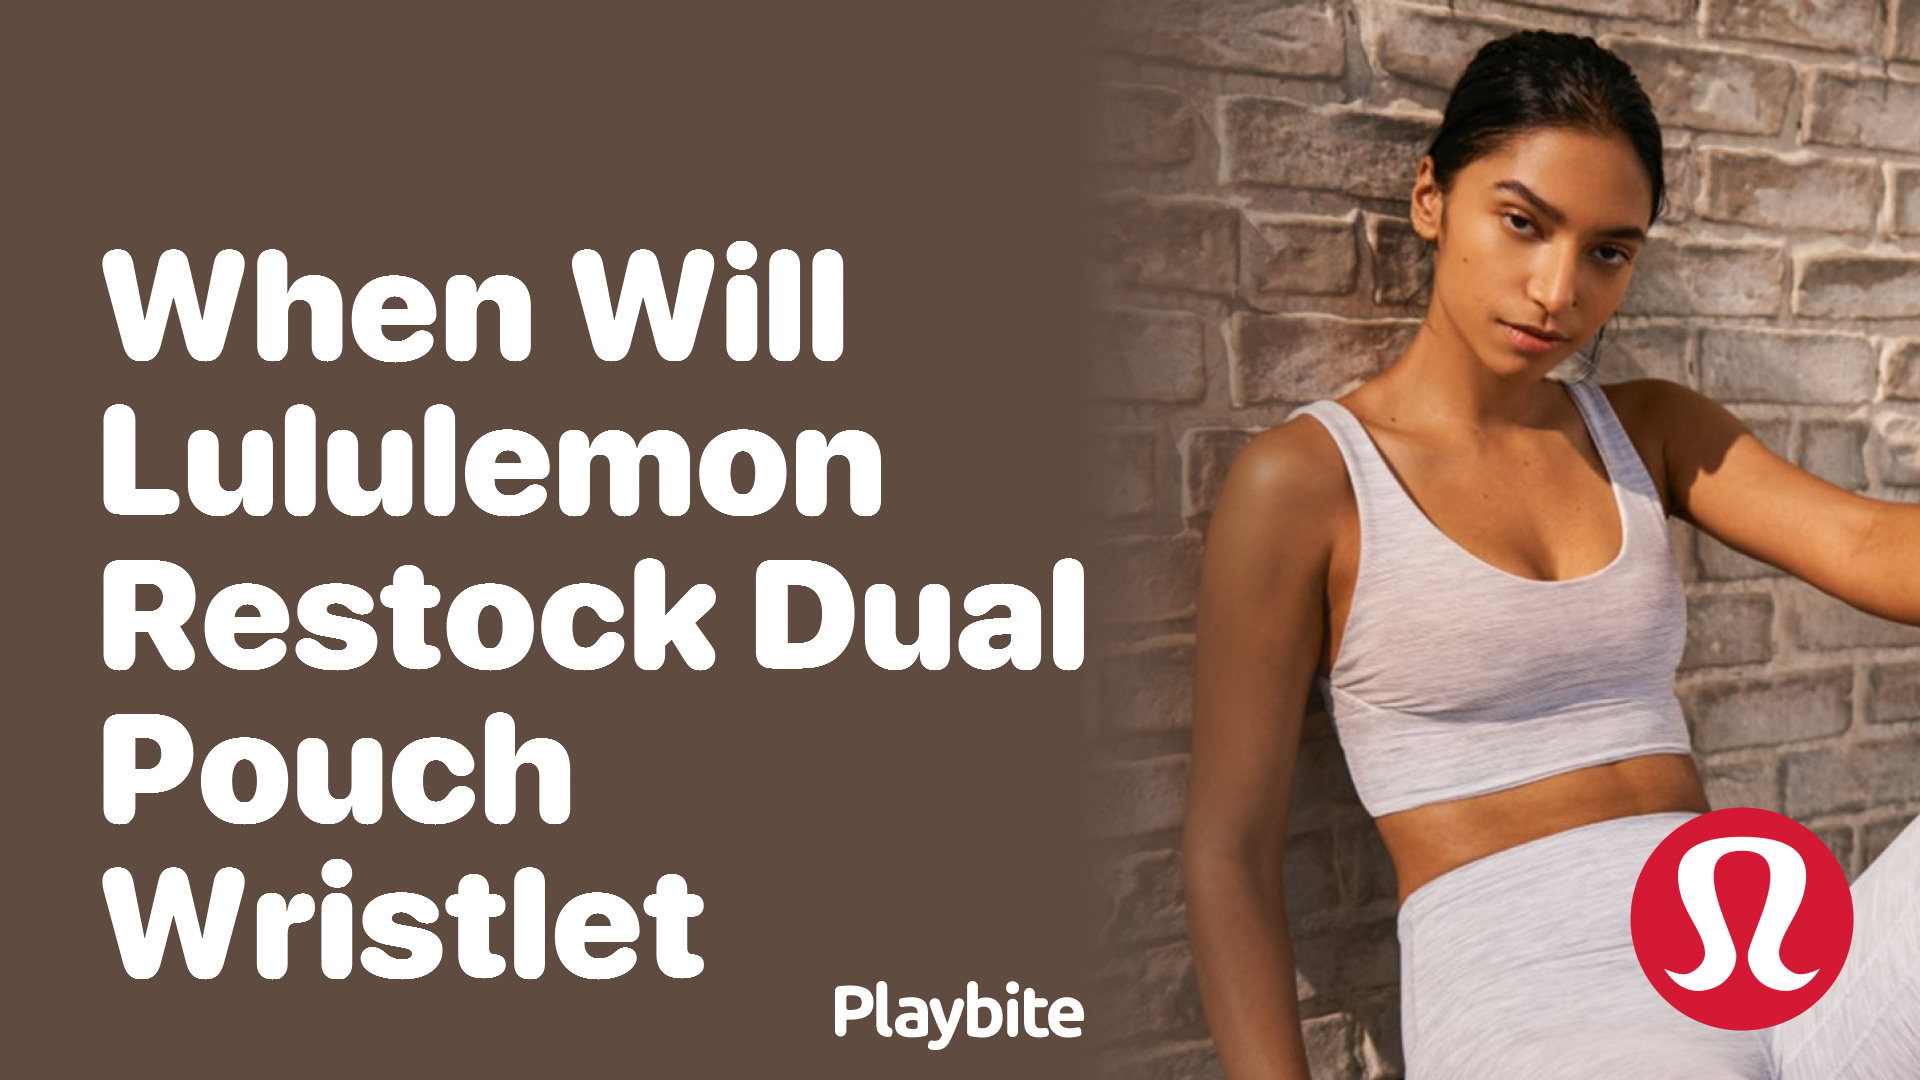 When Will Lululemon Restock the Dual Pouch Wristlet? - Playbite